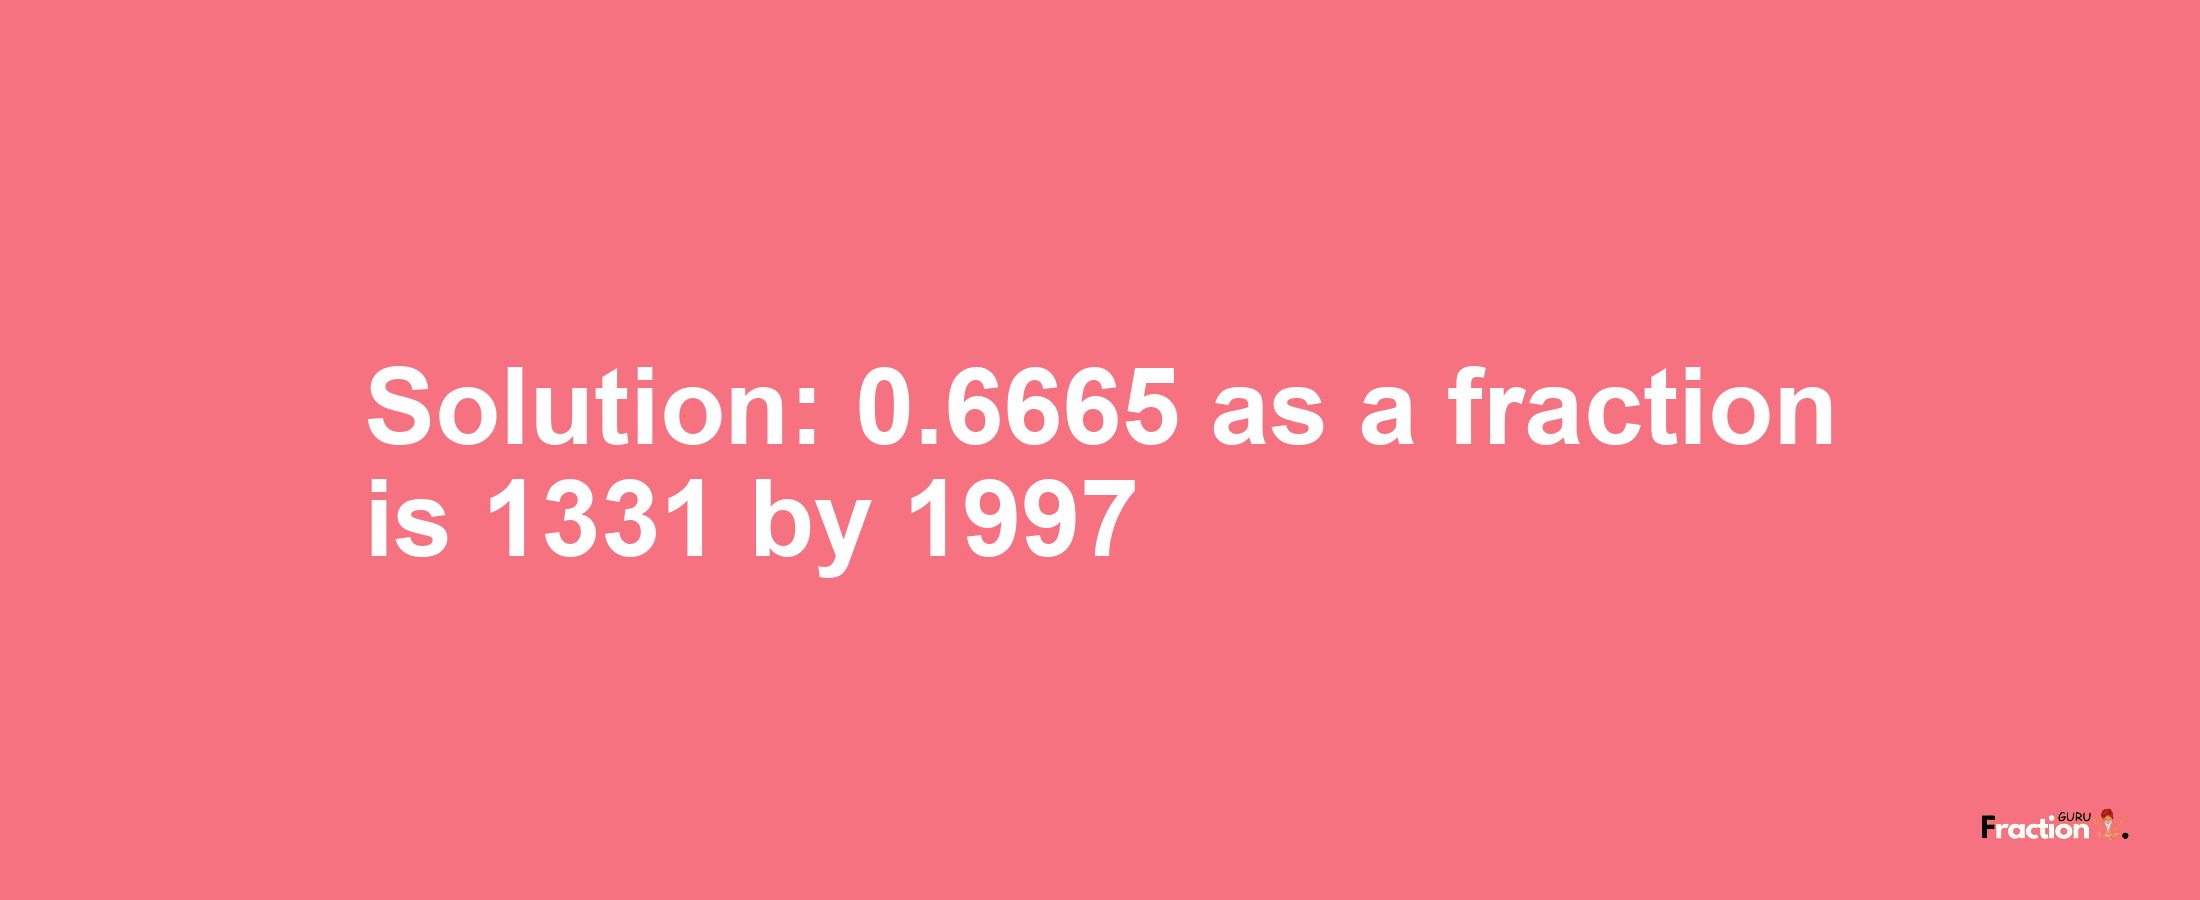 Solution:0.6665 as a fraction is 1331/1997